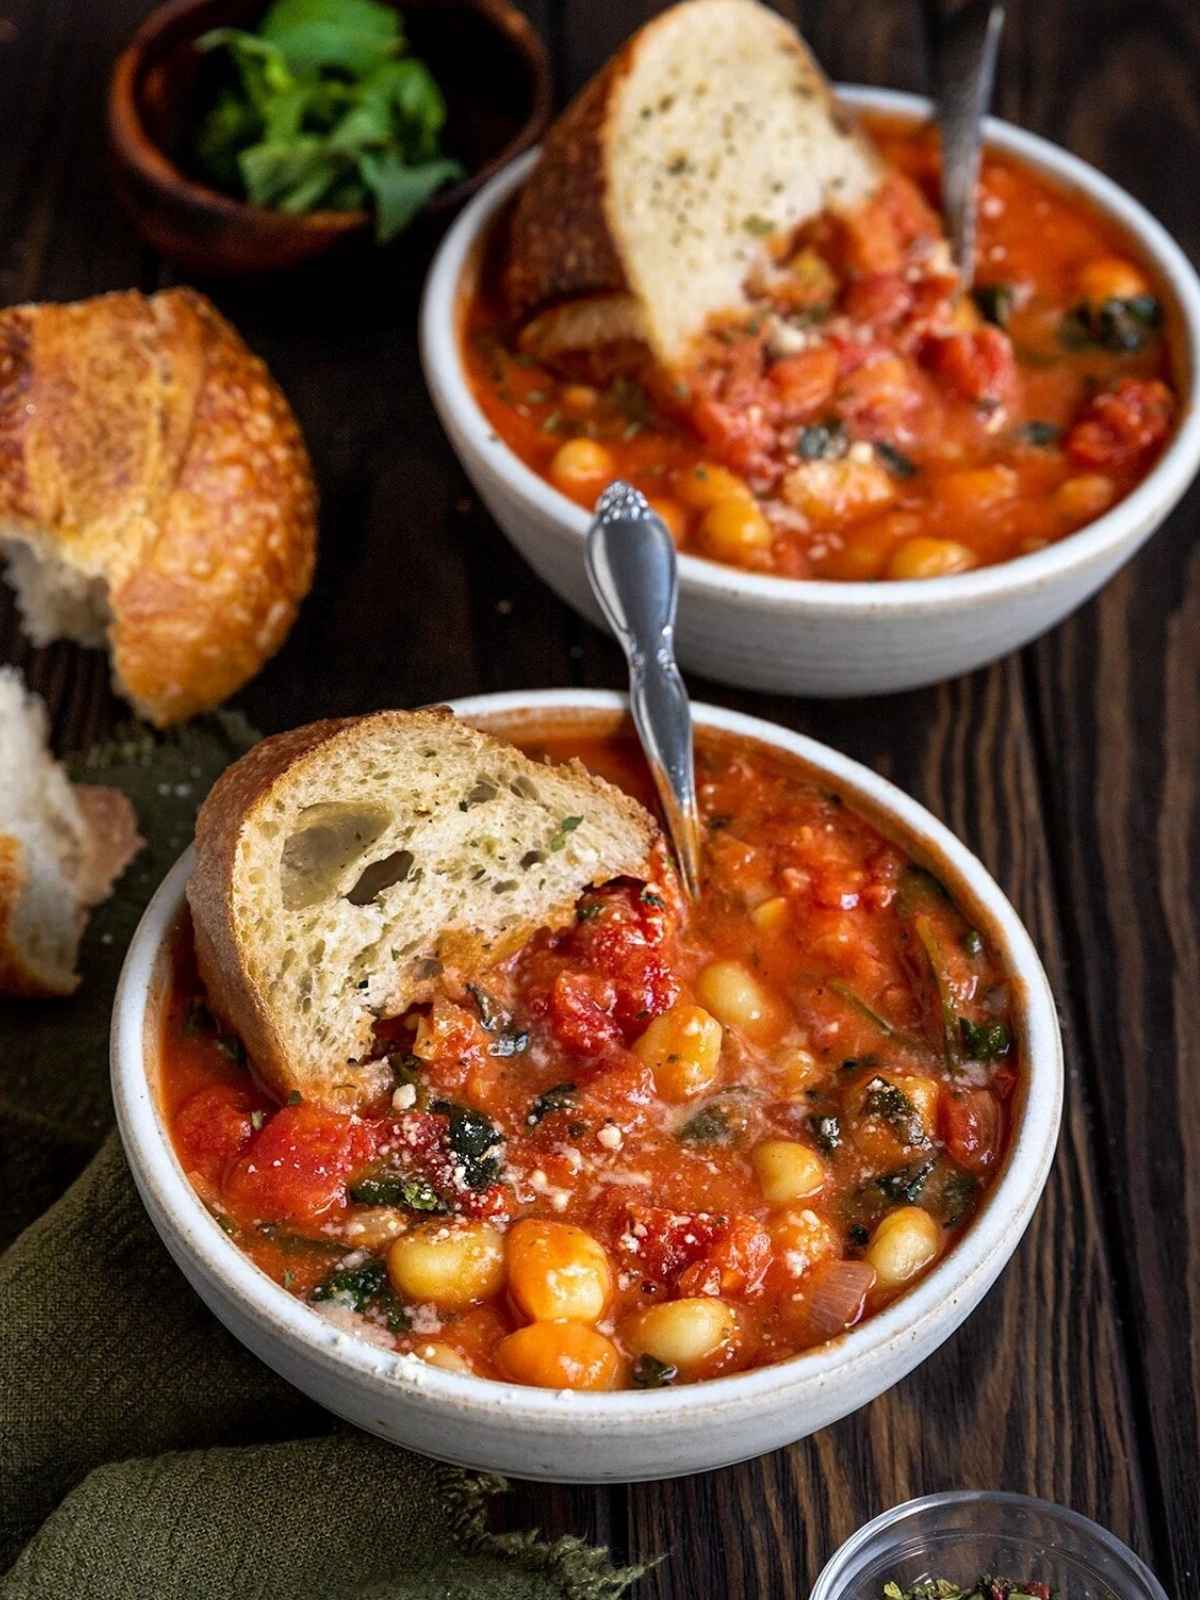 Tomato Gnocchi Soup served in two white bowls with bread